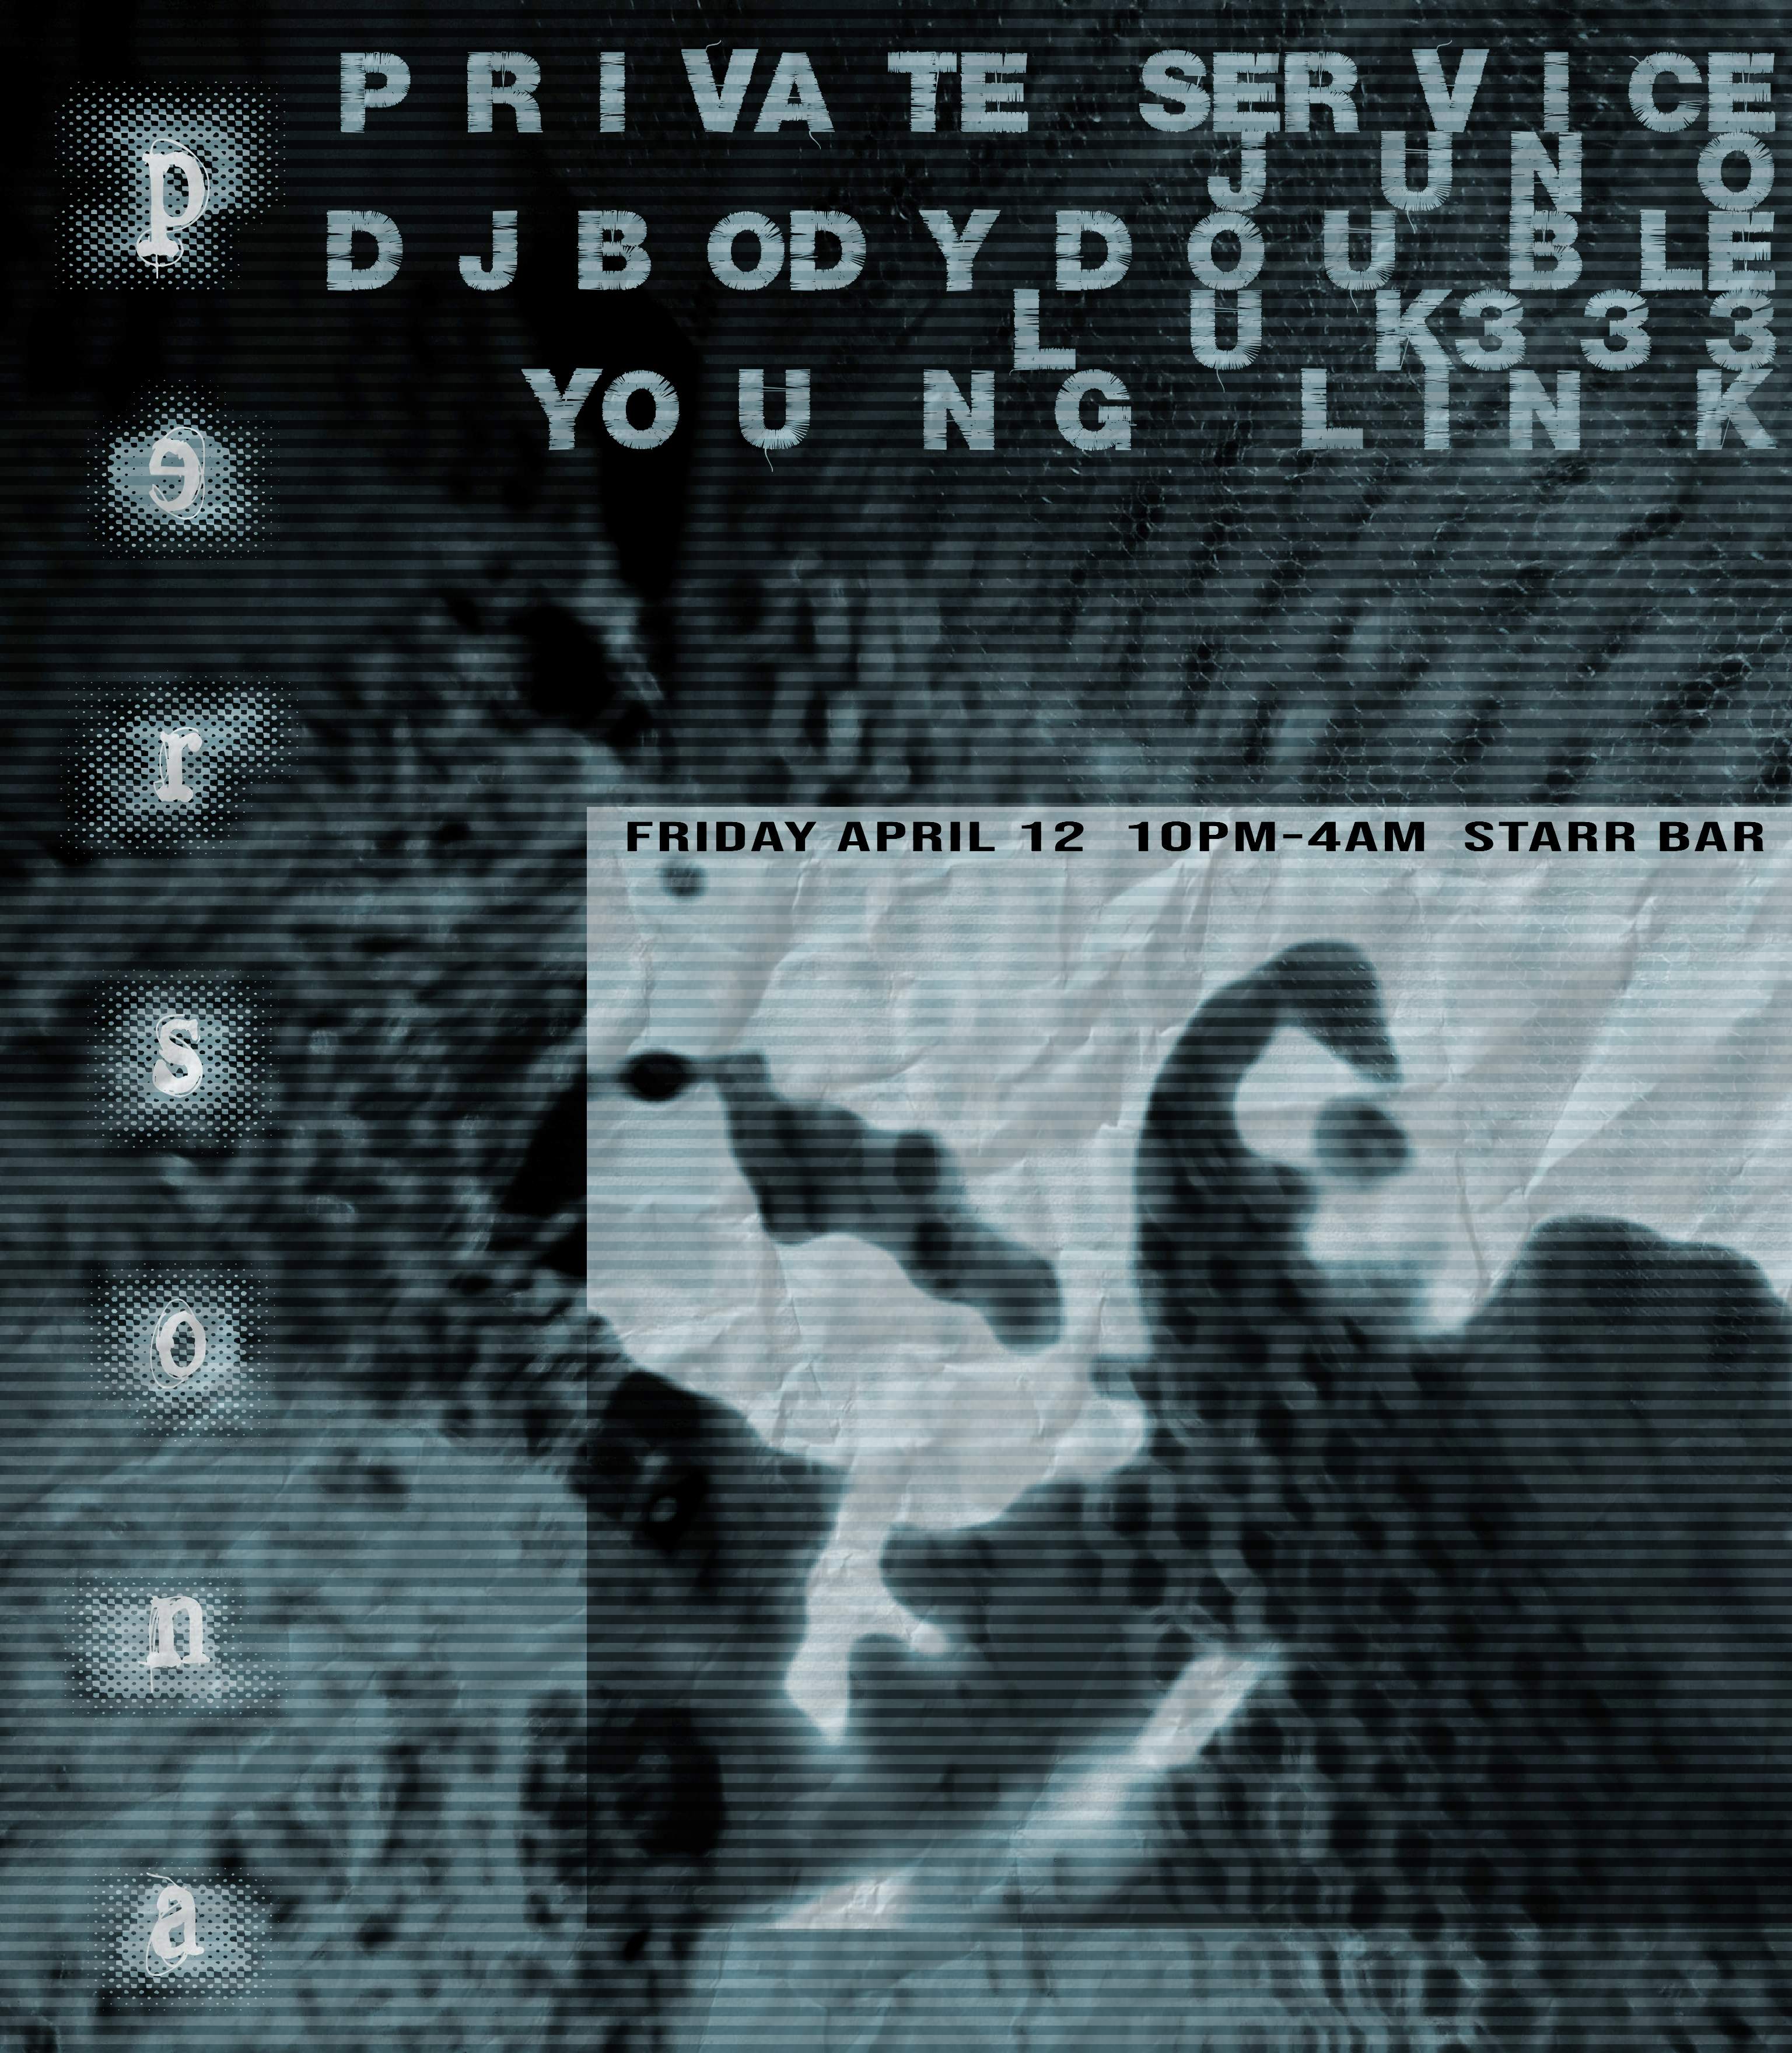 PERSONA with Private Service, Juno, DJ Body Double, Luk333, Young link - Página frontal